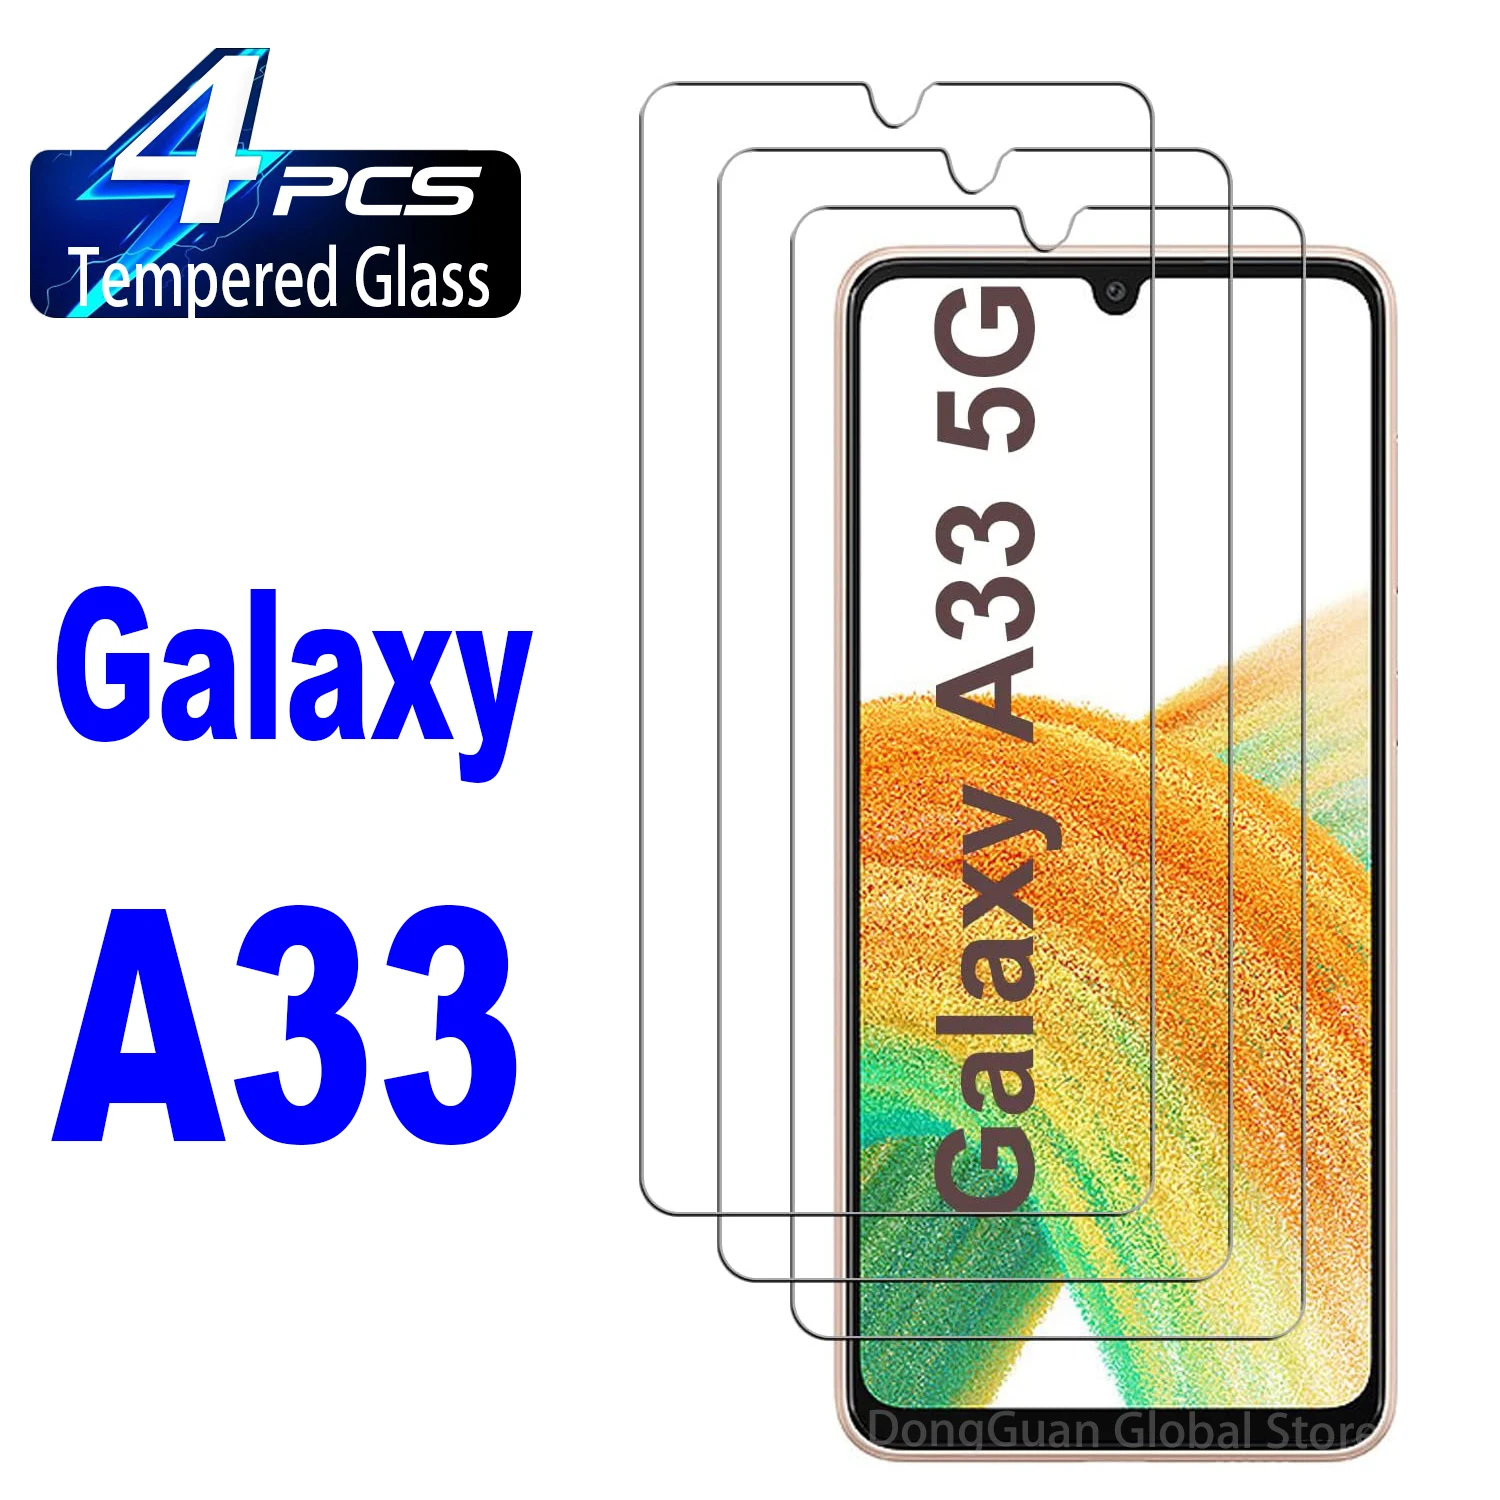 

4Pcs High Auminum Tempered Glass For Samsung Galaxy A33 5G A51 A71 A22 A32 A52 A72 A53 A73 A23 S20FE 5G Screen Protector Glass